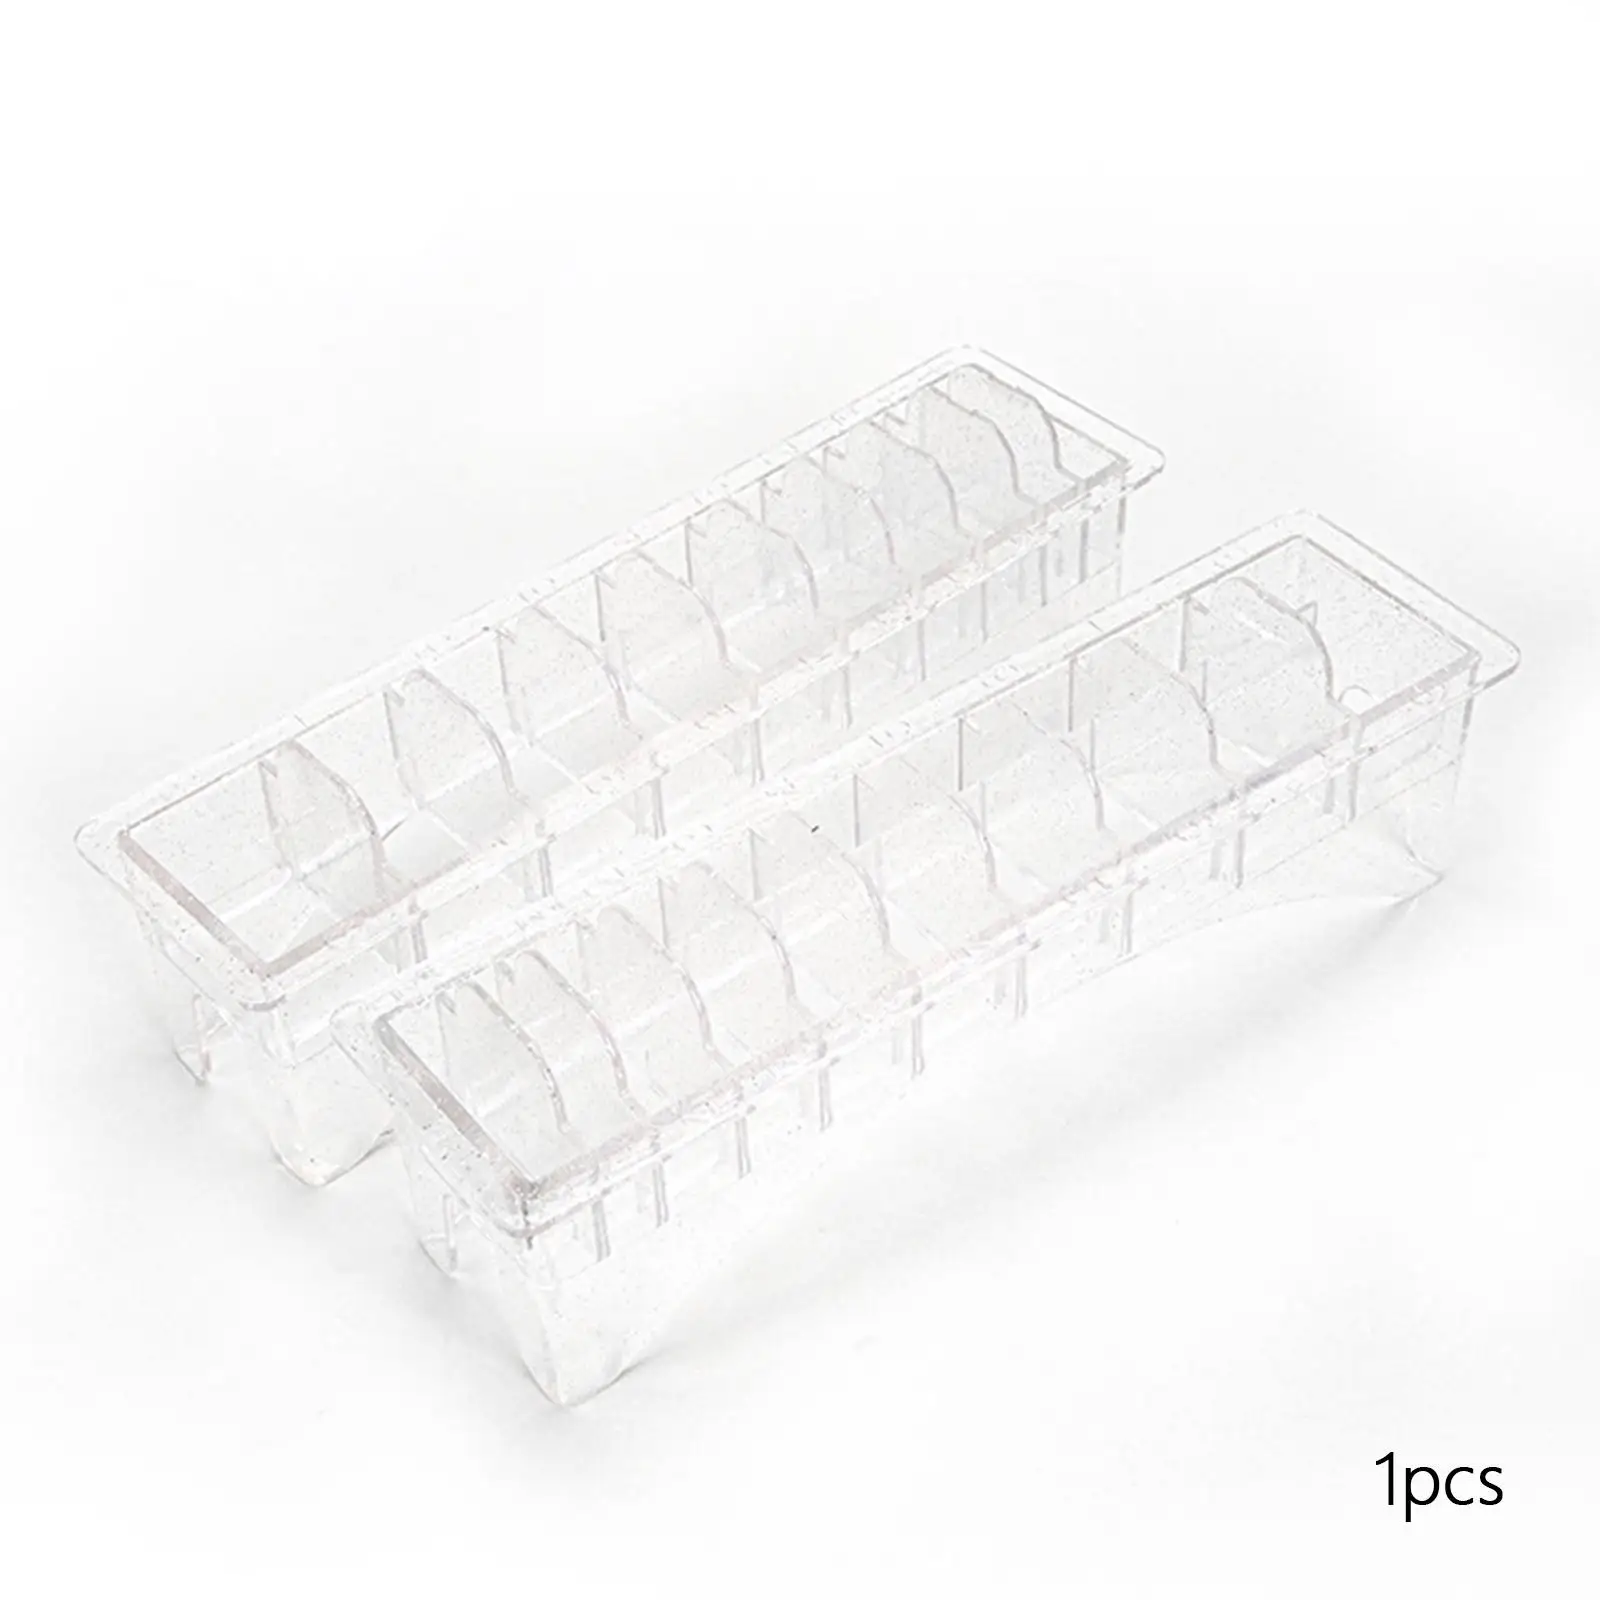 Universal Guide Comb Storage Box 10 Grid Accessories Transparent Container Holder Limit Comb Organizer for Shop Barbershop Home